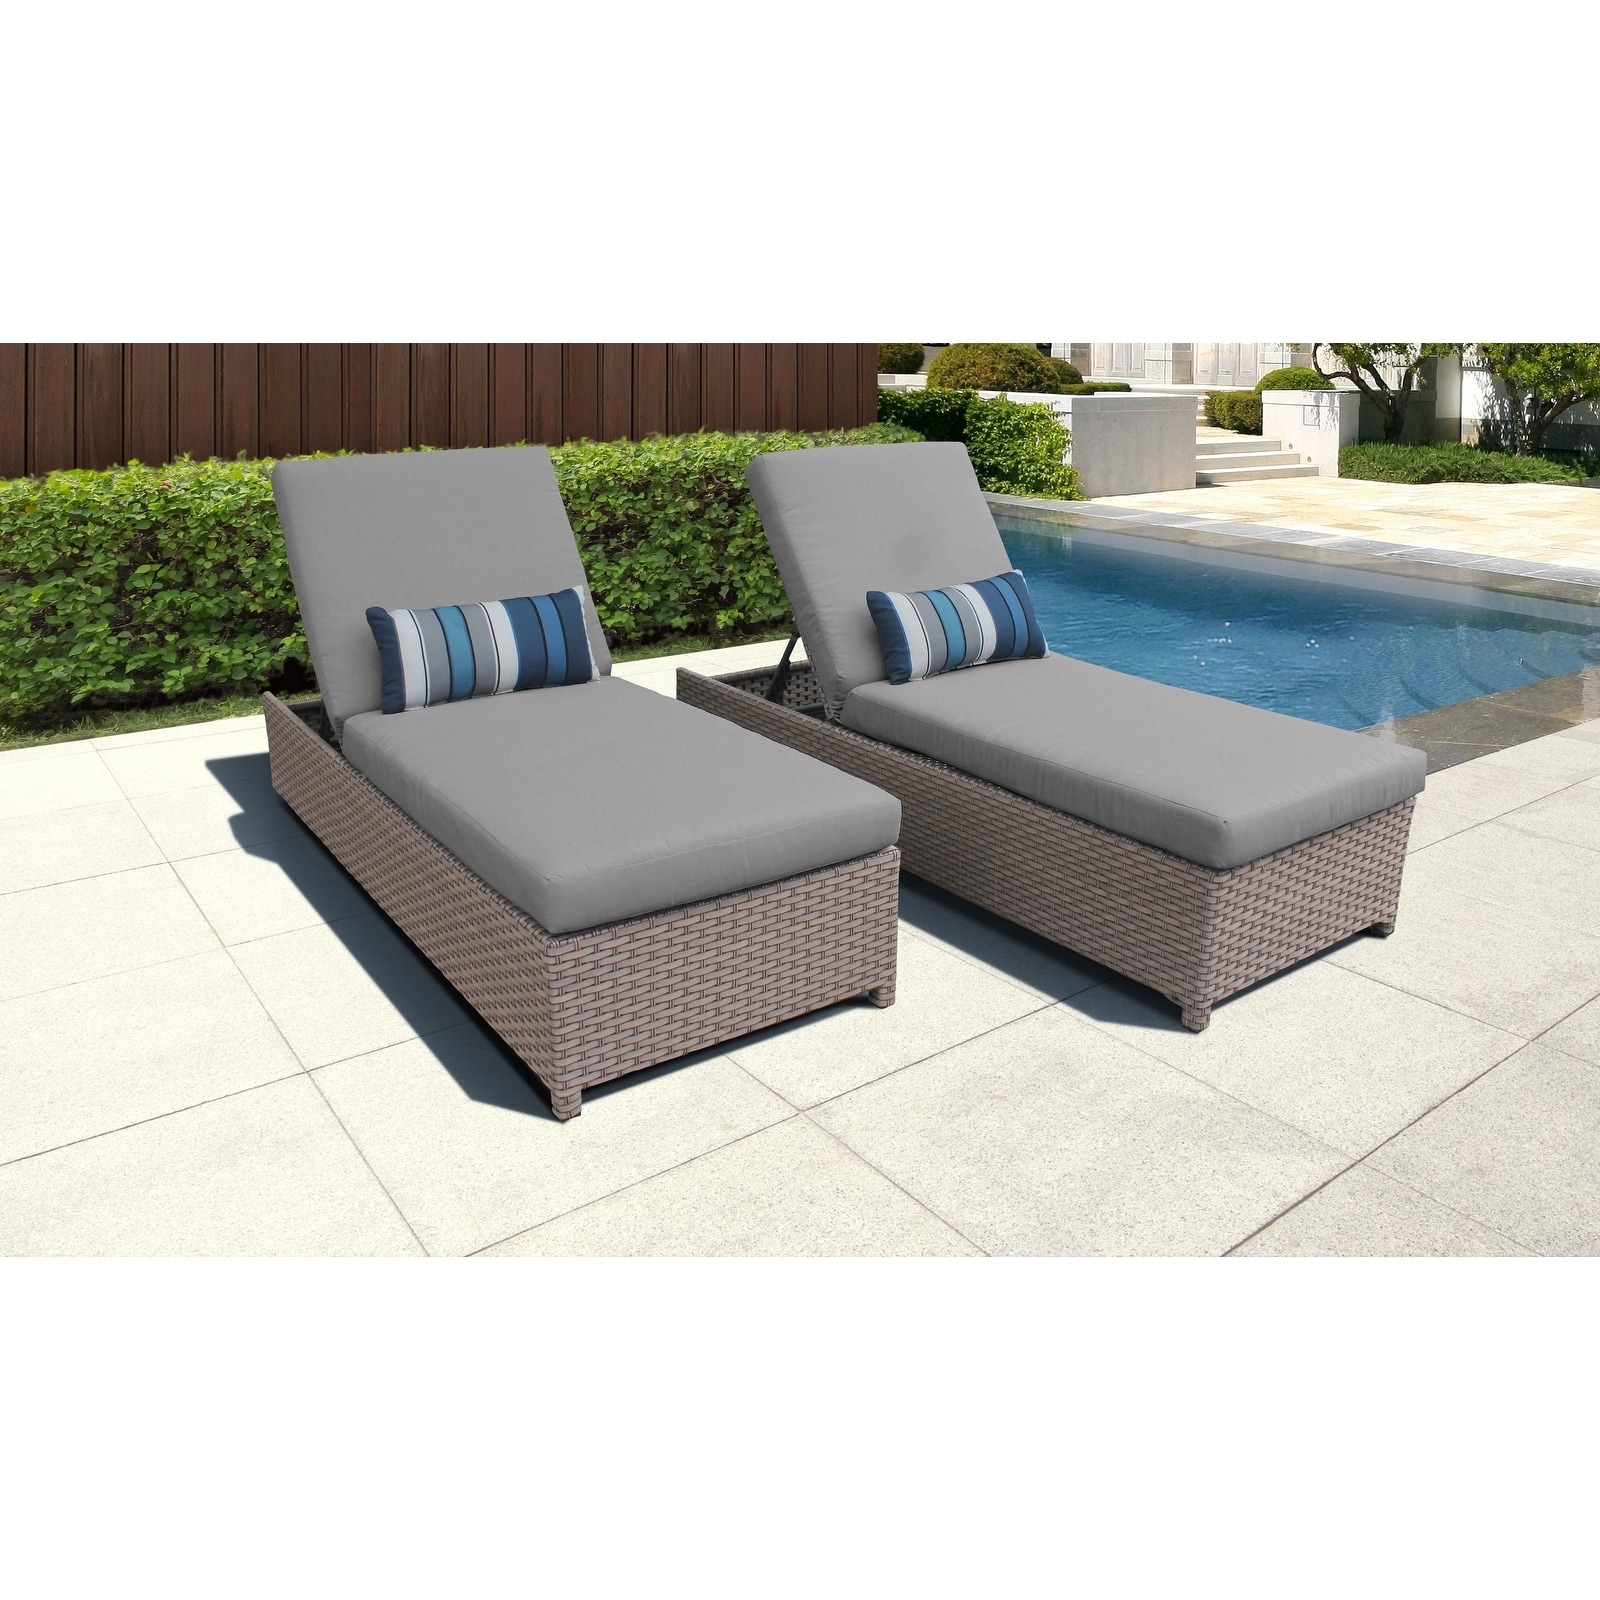 Florence Wheeled Chaise Set Of 2 Outdoor Wicker Patio Furniture